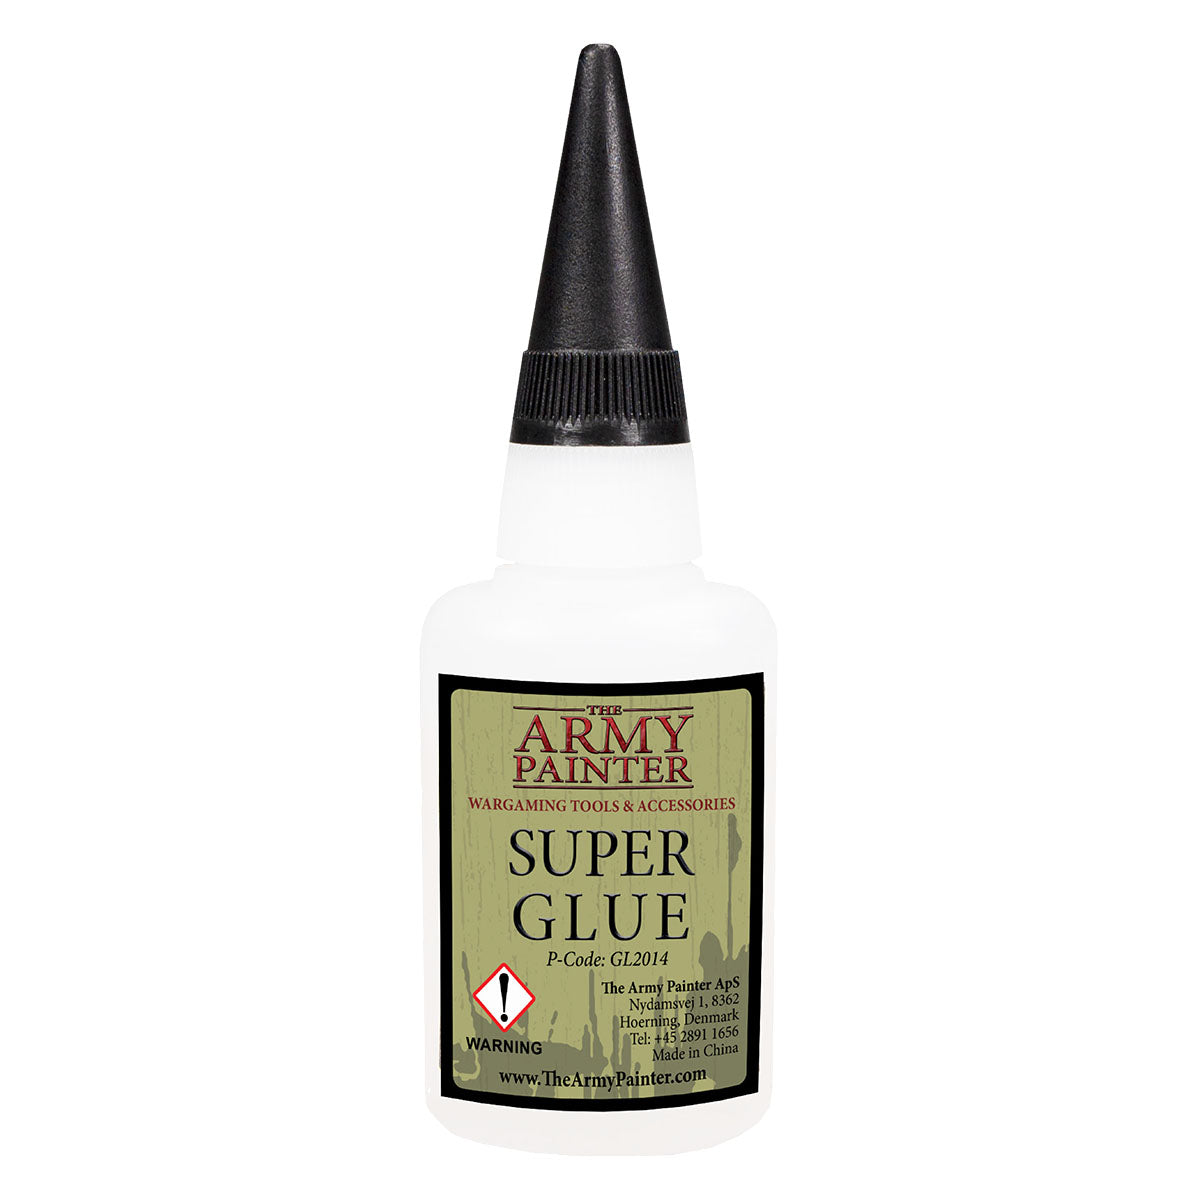 Super Glue: a must have for resin and metal miniatures.